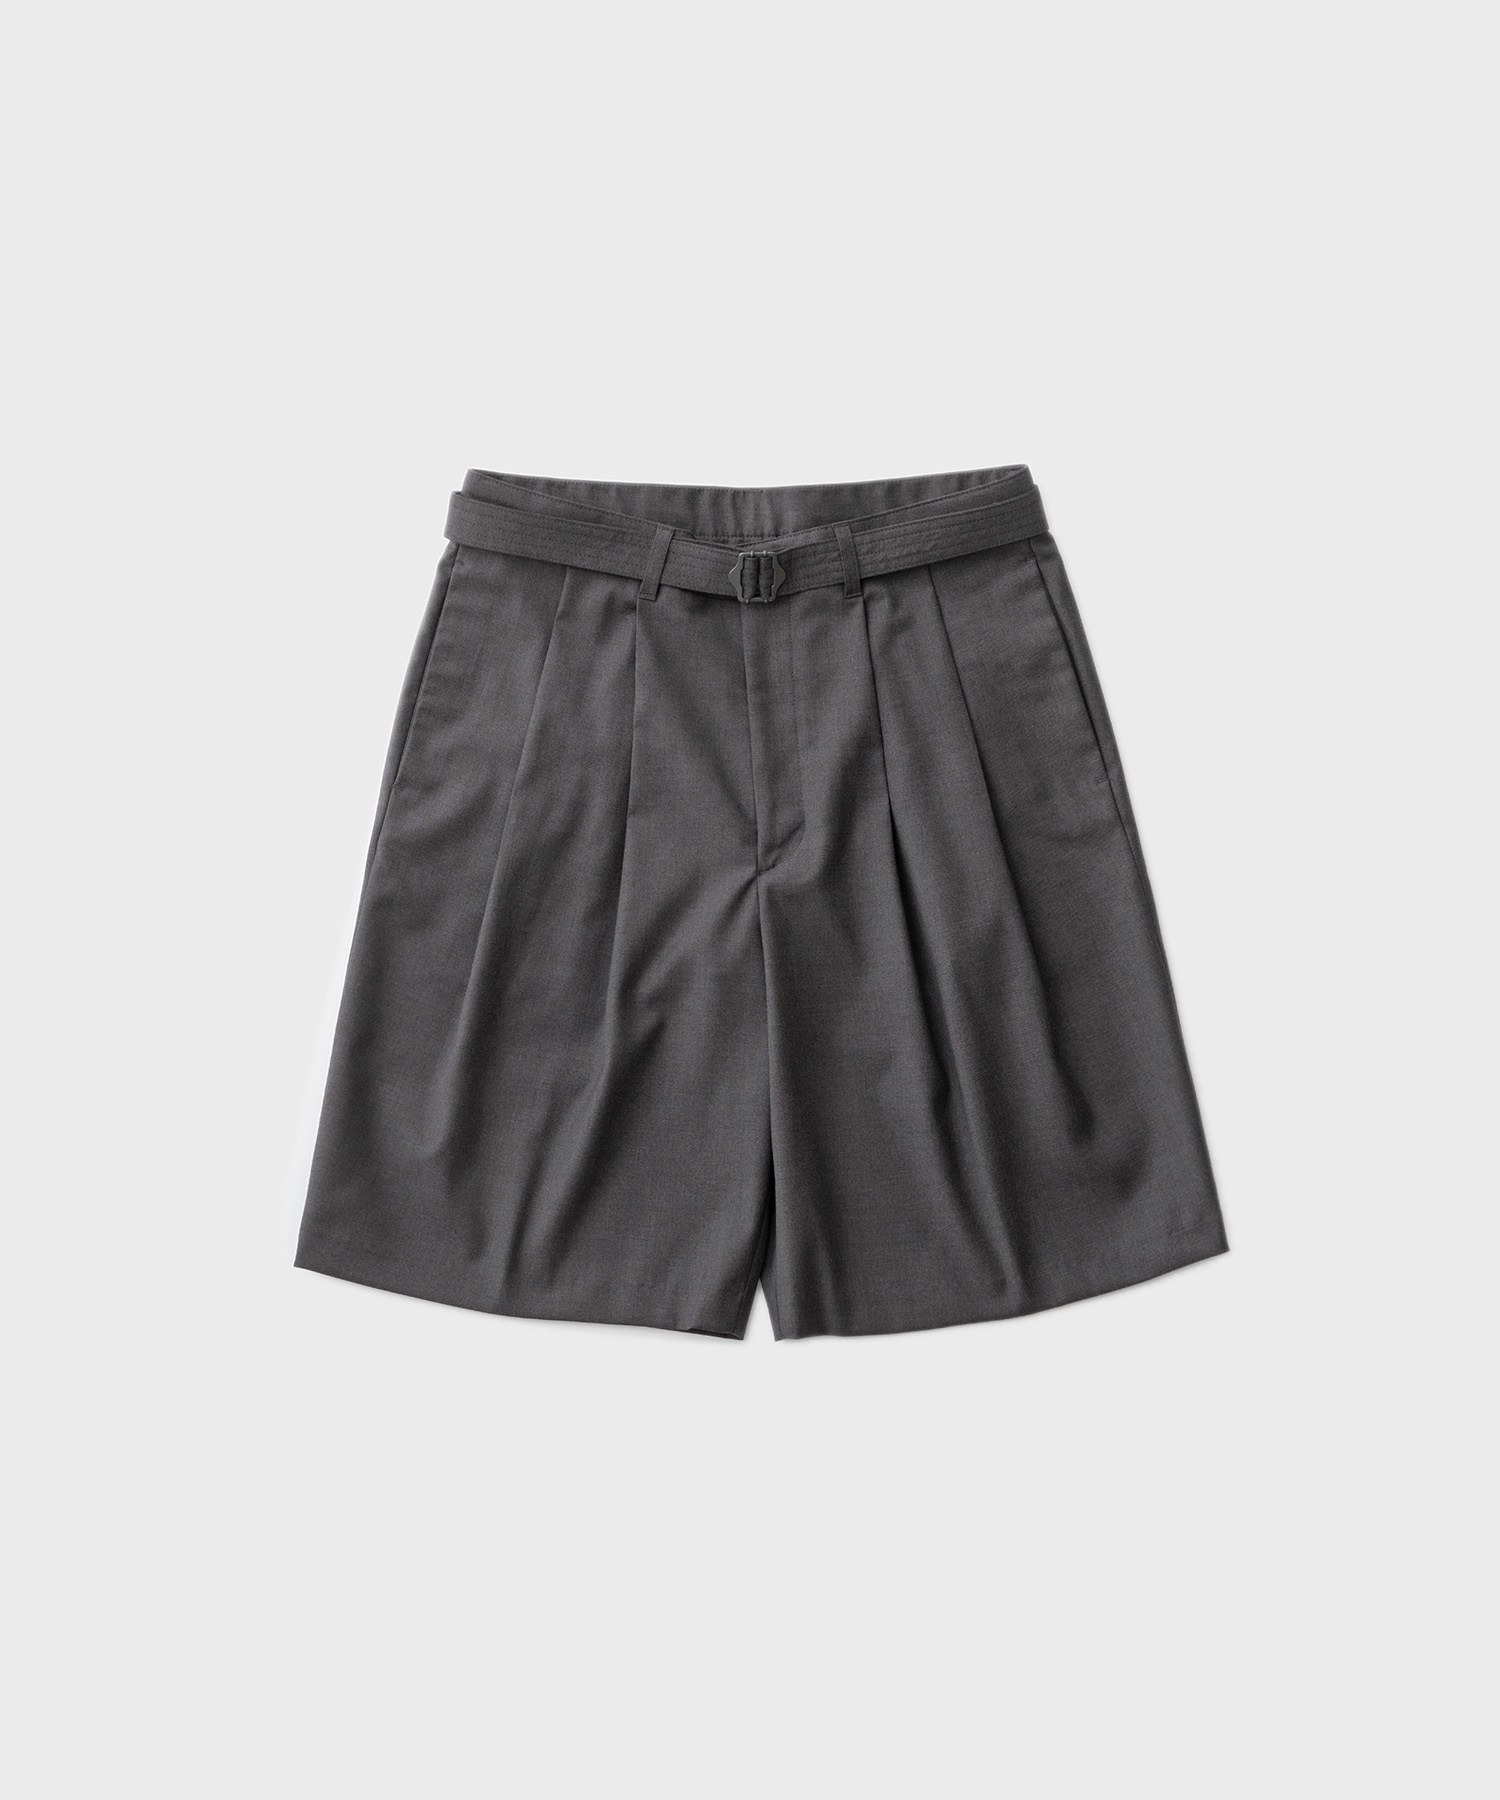 23SS Hemingway Belted Shorts (Heather Gray)